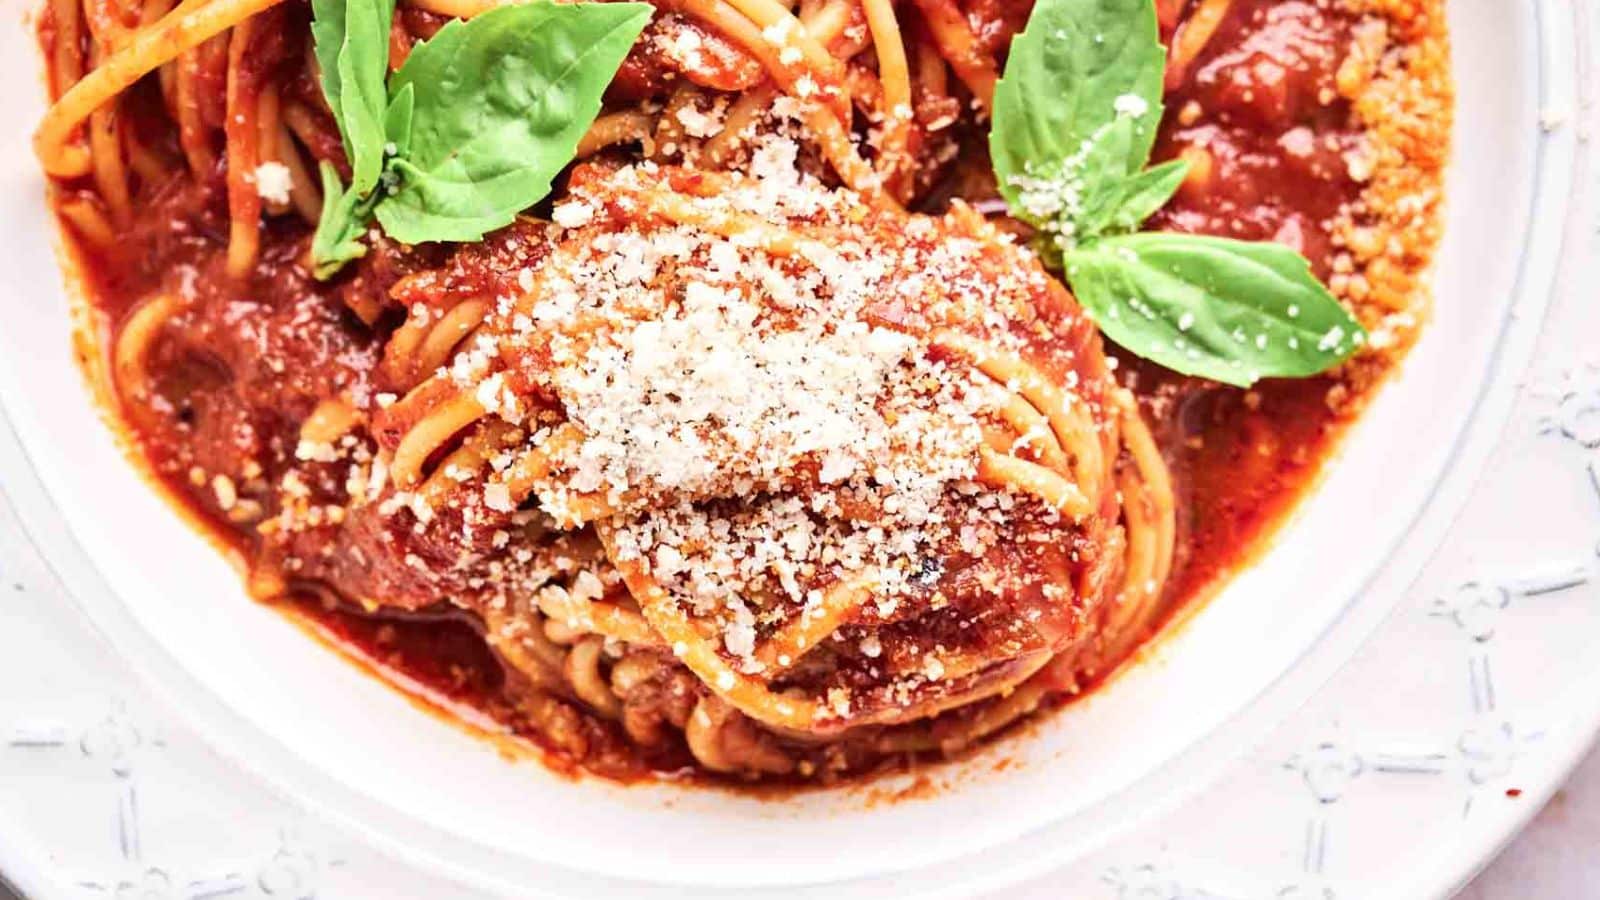 You've Been Warned: Prepare To DROOL Over These 13 Pasta Dishes